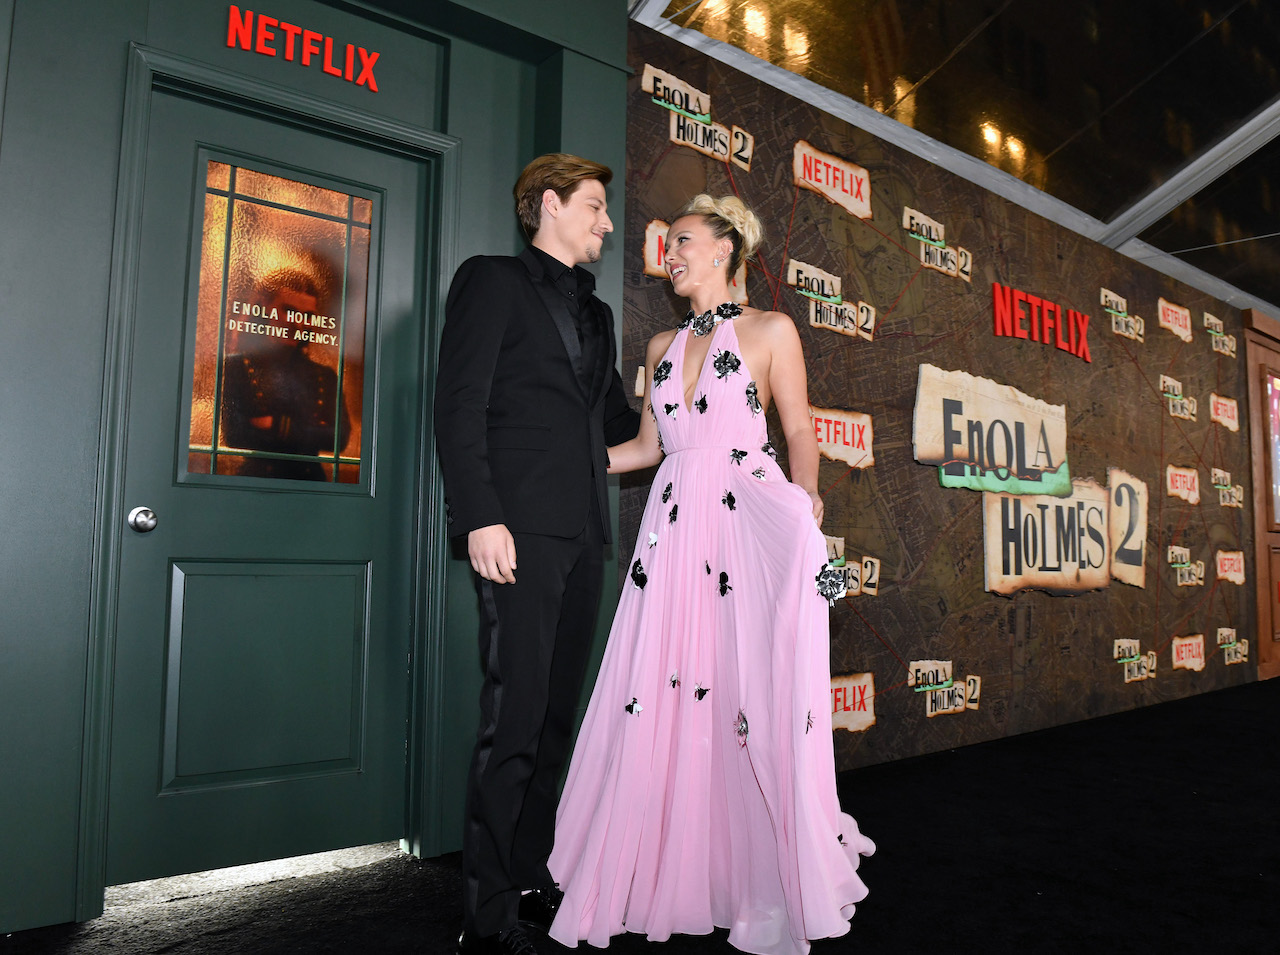 Millie Bobby Brown is joined by beau Jake Bongiovi at premiere for  Netflix's Enola Holmes 2 in NYC